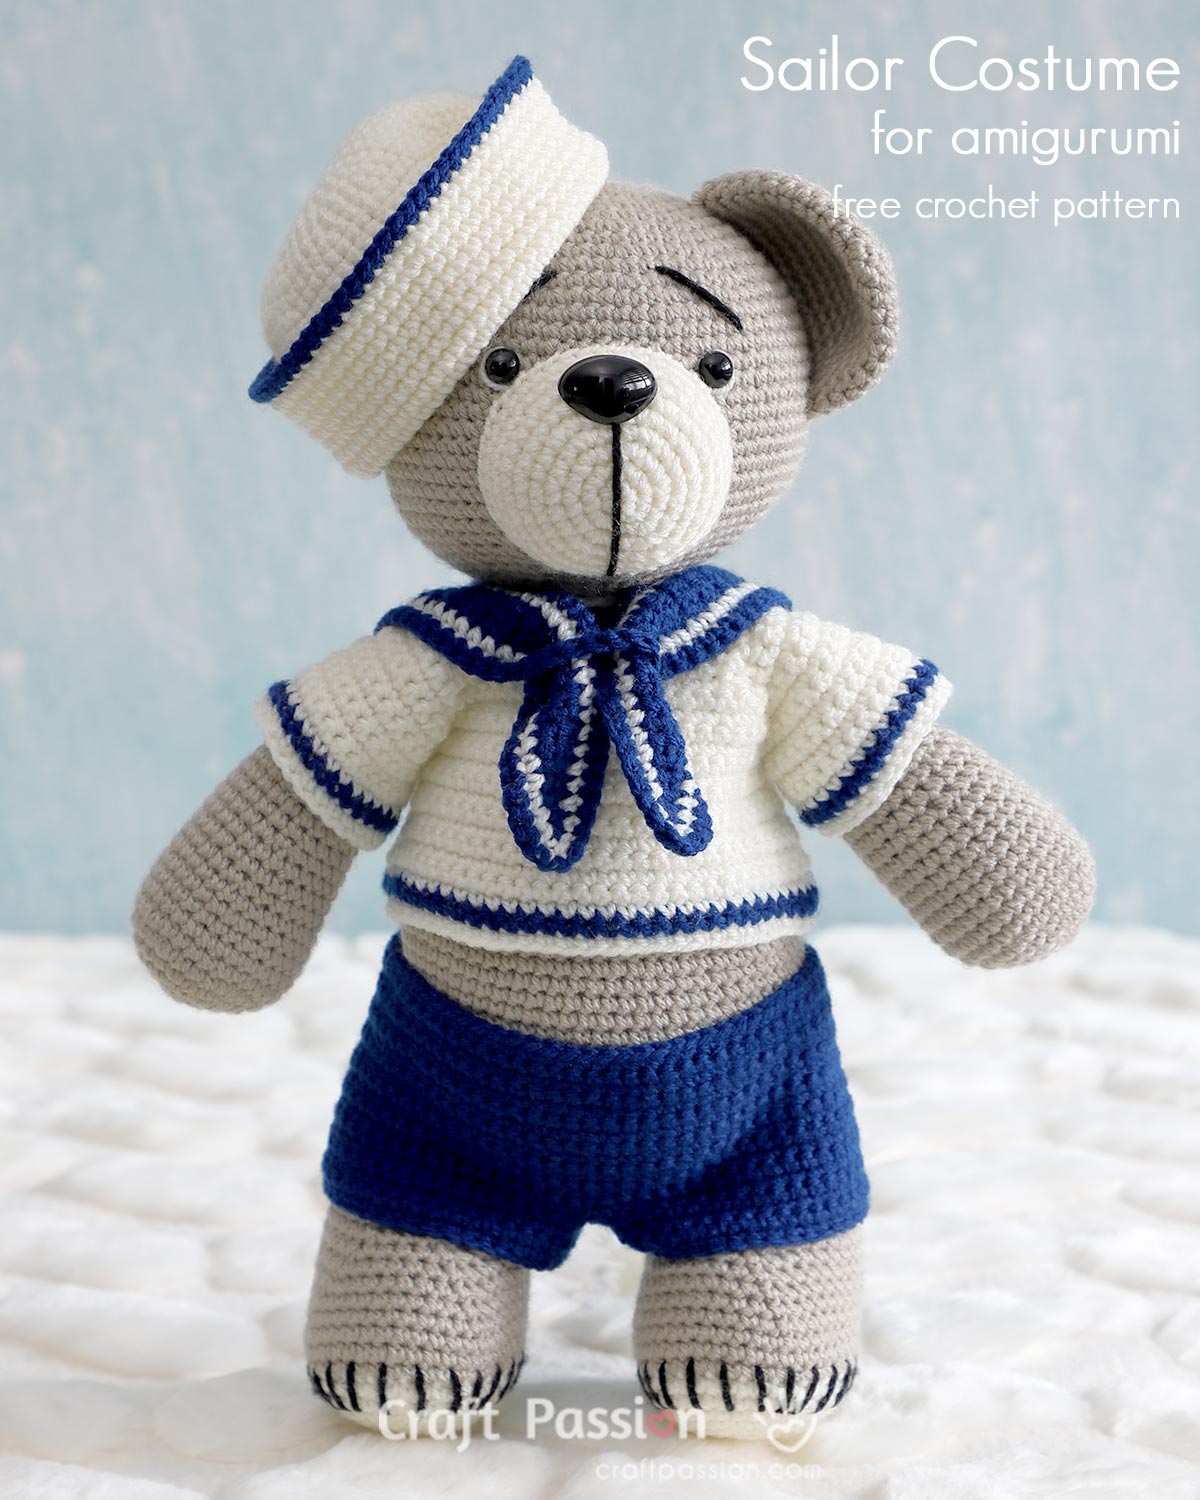 Set sail with our free sailor costume crochet pattern for amigurumi, perfect for adding a touch of nautical charm to your crochet animal collection!